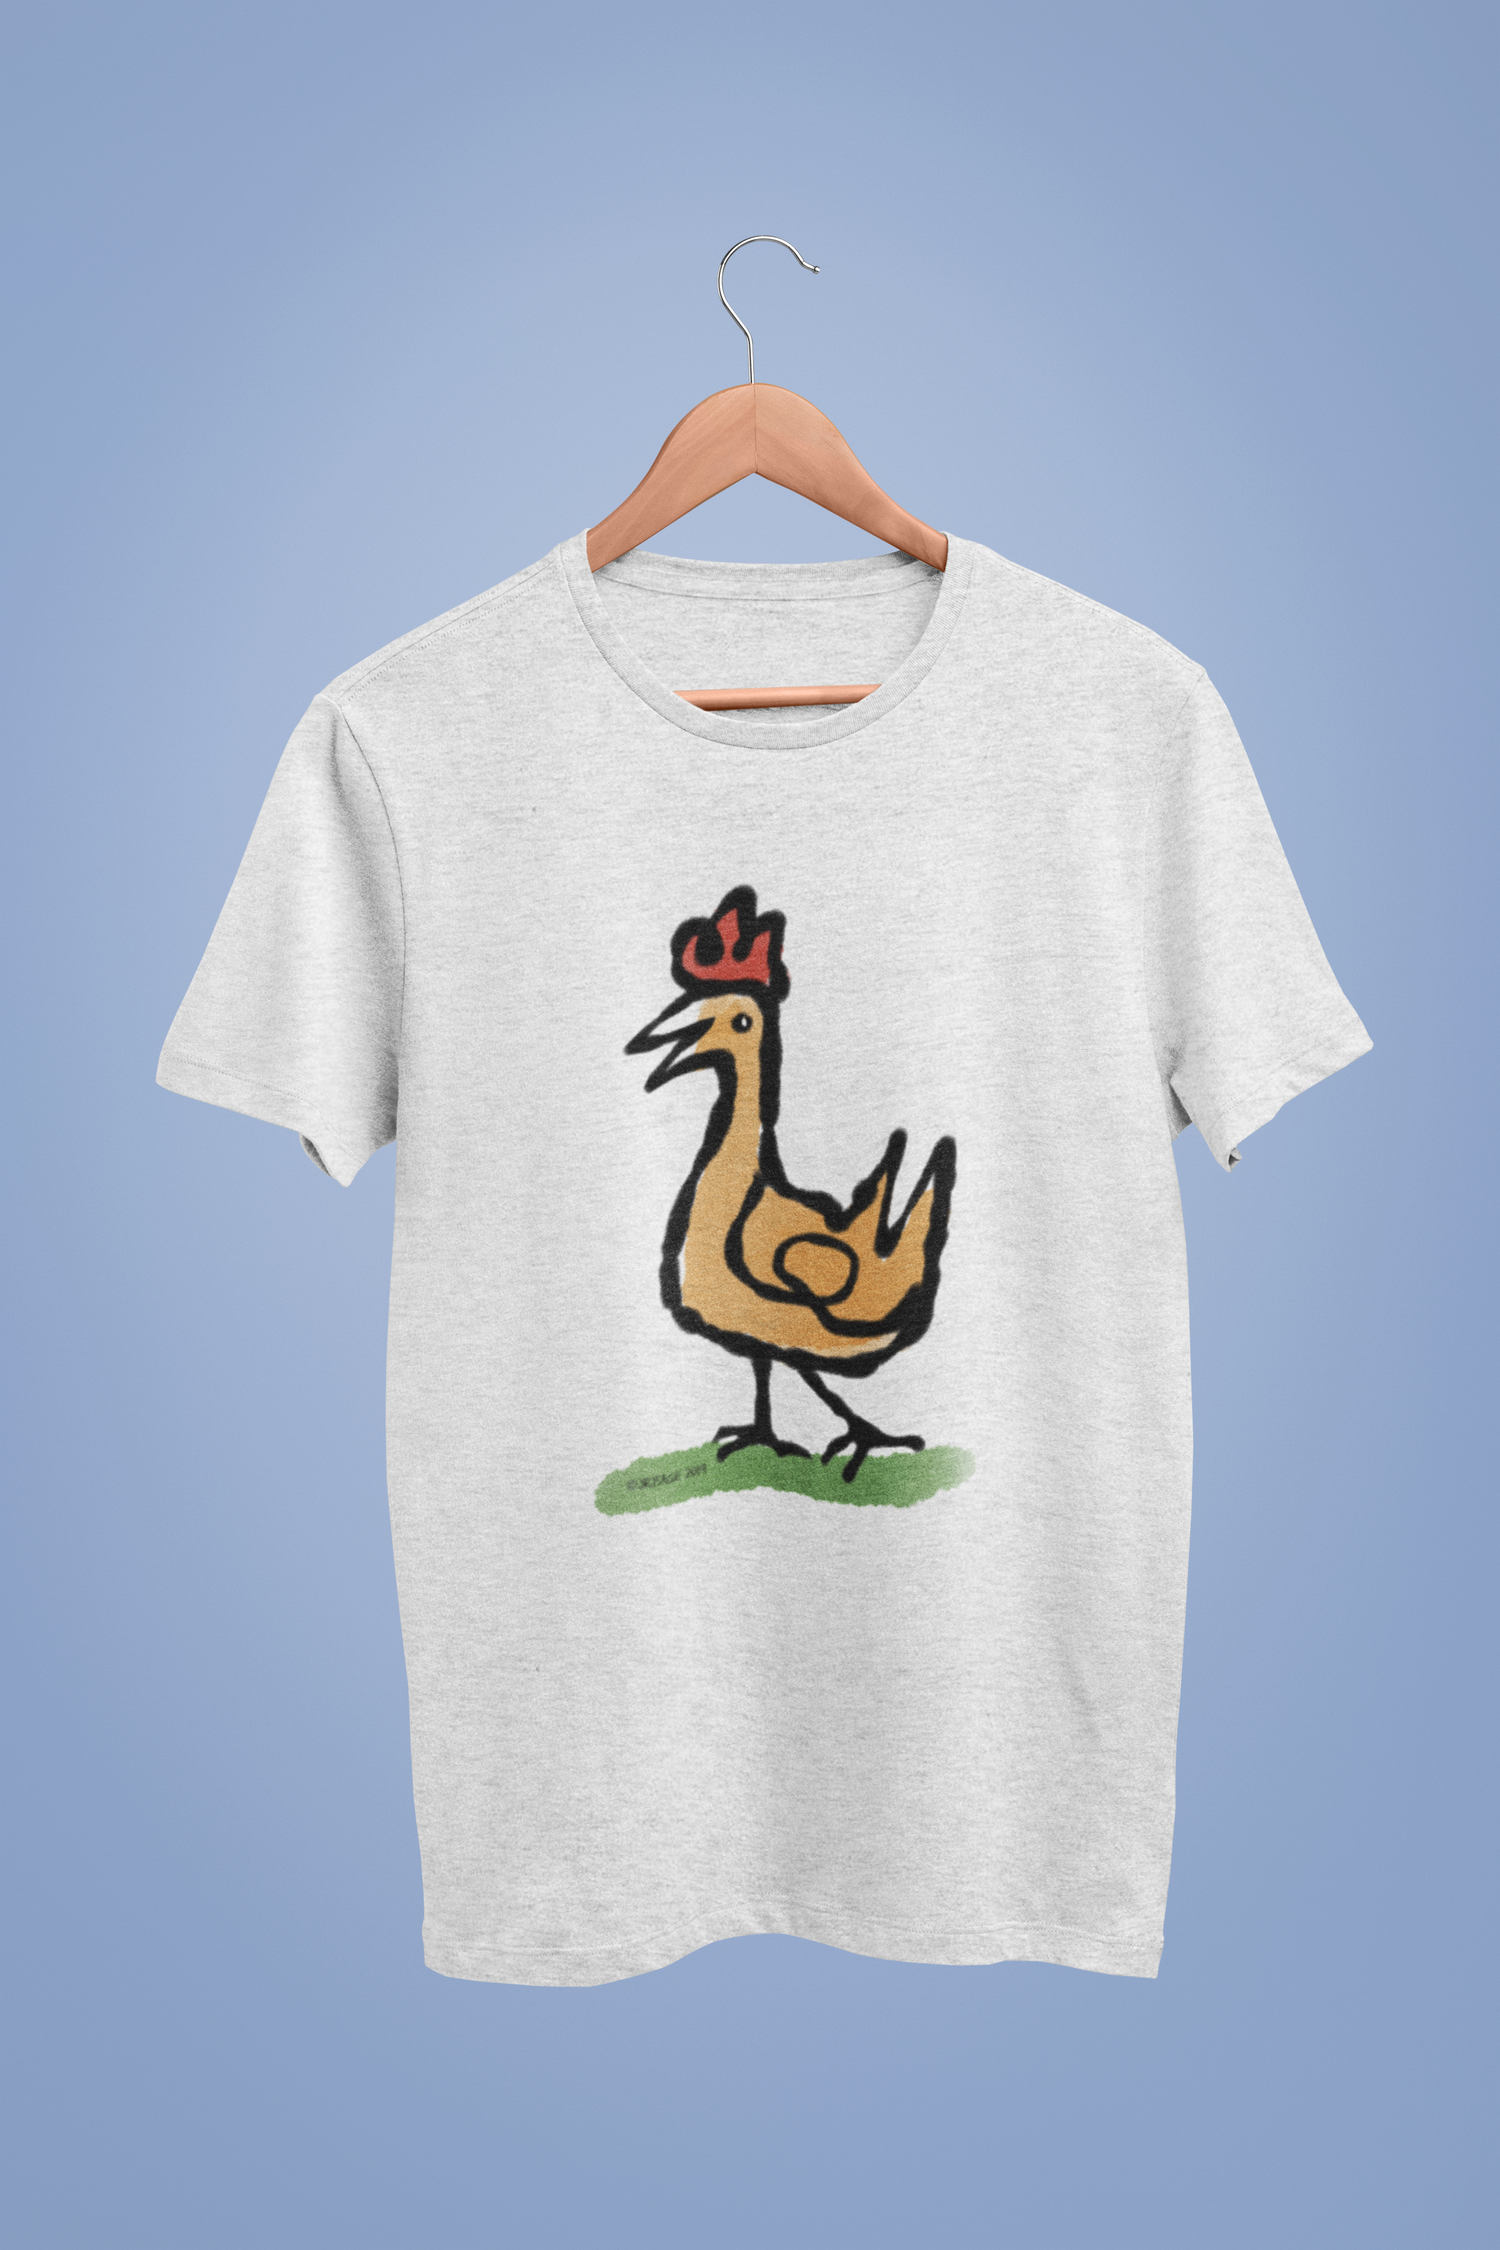 Happy Chicken T-shirt - Illustrated Funny Chicken design on Cream heather grey colour vegan cotton t-shirts by Hector and Bone